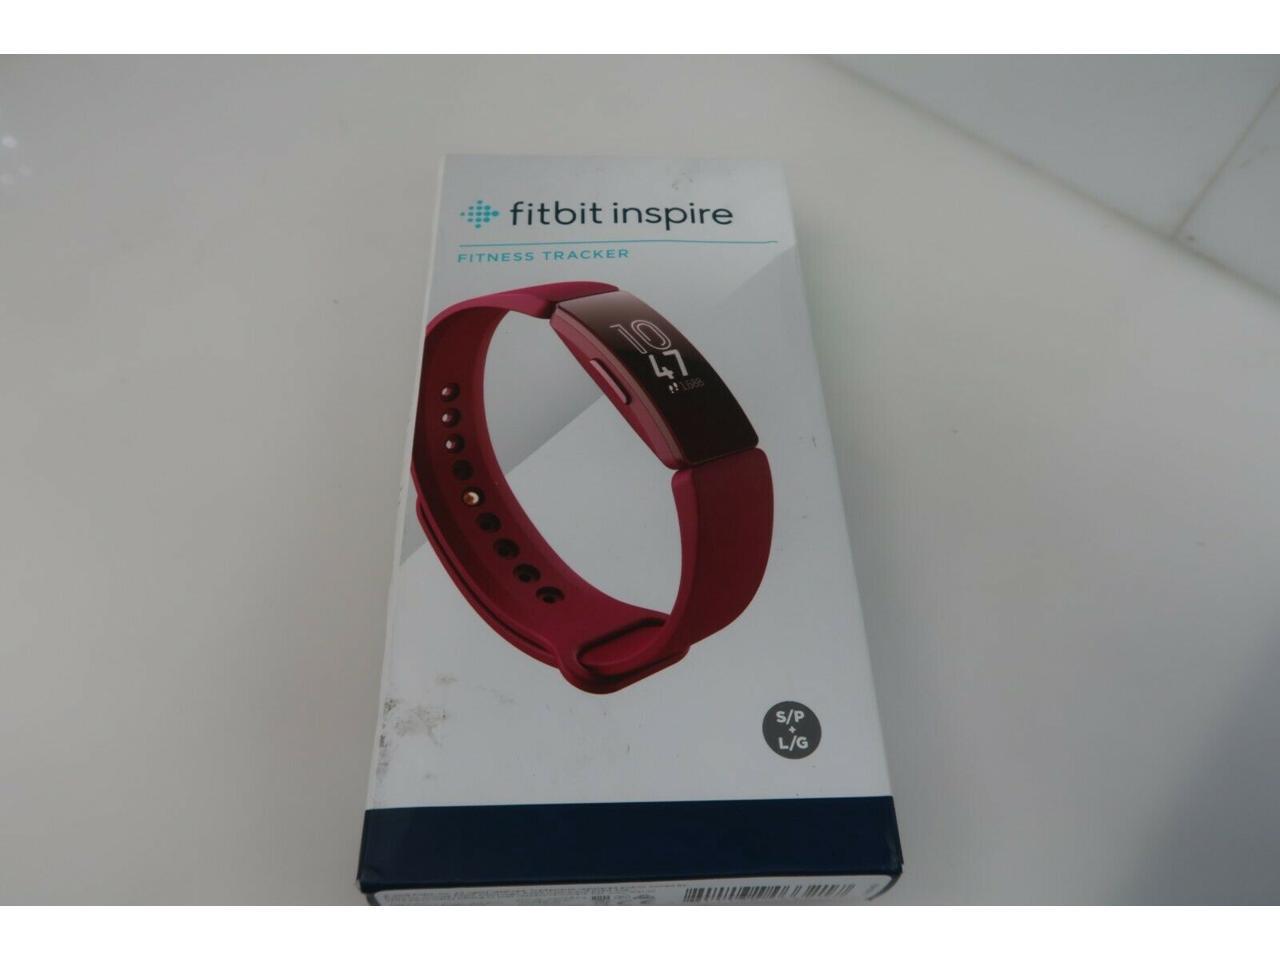 Fitbit Inspire FB412BYBY Fitness Tracker Wristband Sangria for sale online 